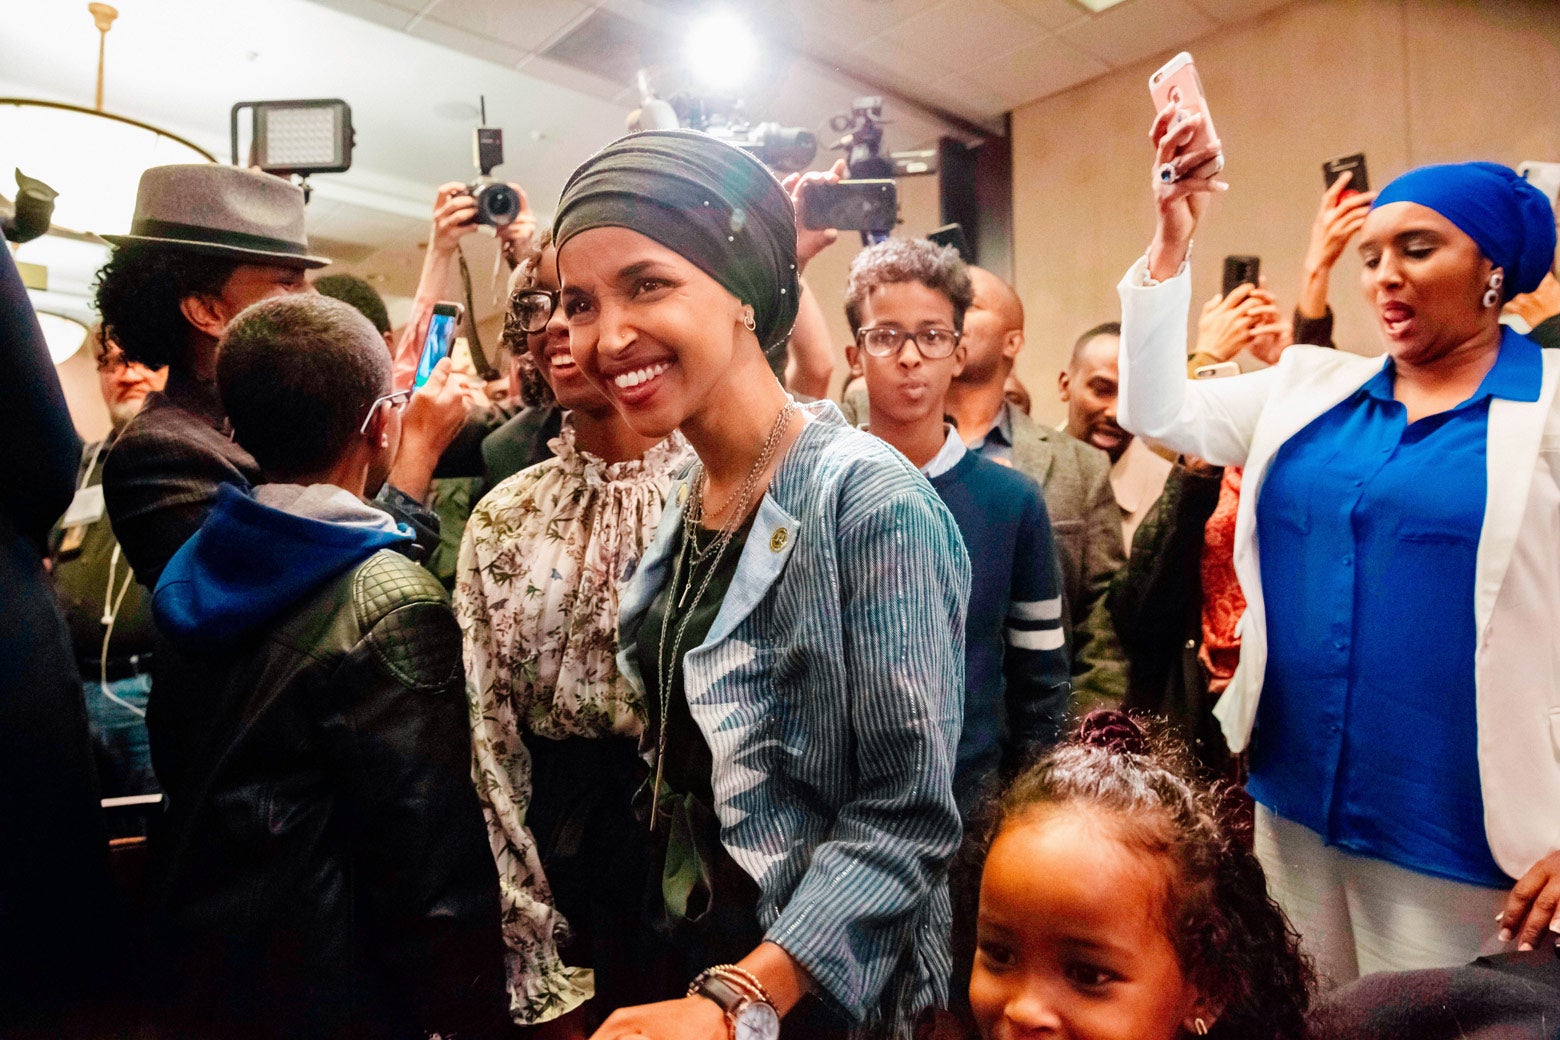 Ilhan Omar in a crowd of smiling supporters.